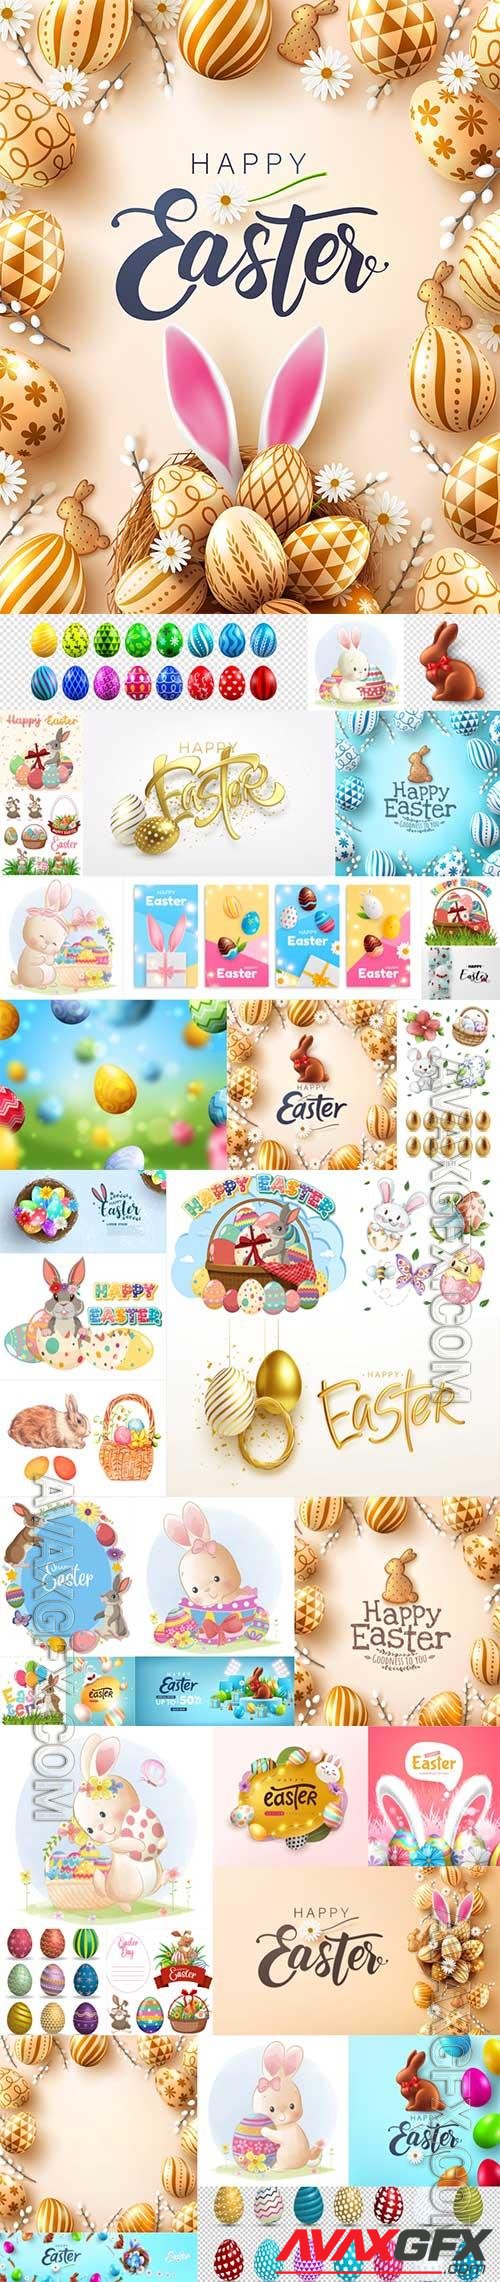 Easter poster and banner template with golden easter eggs in the bunny